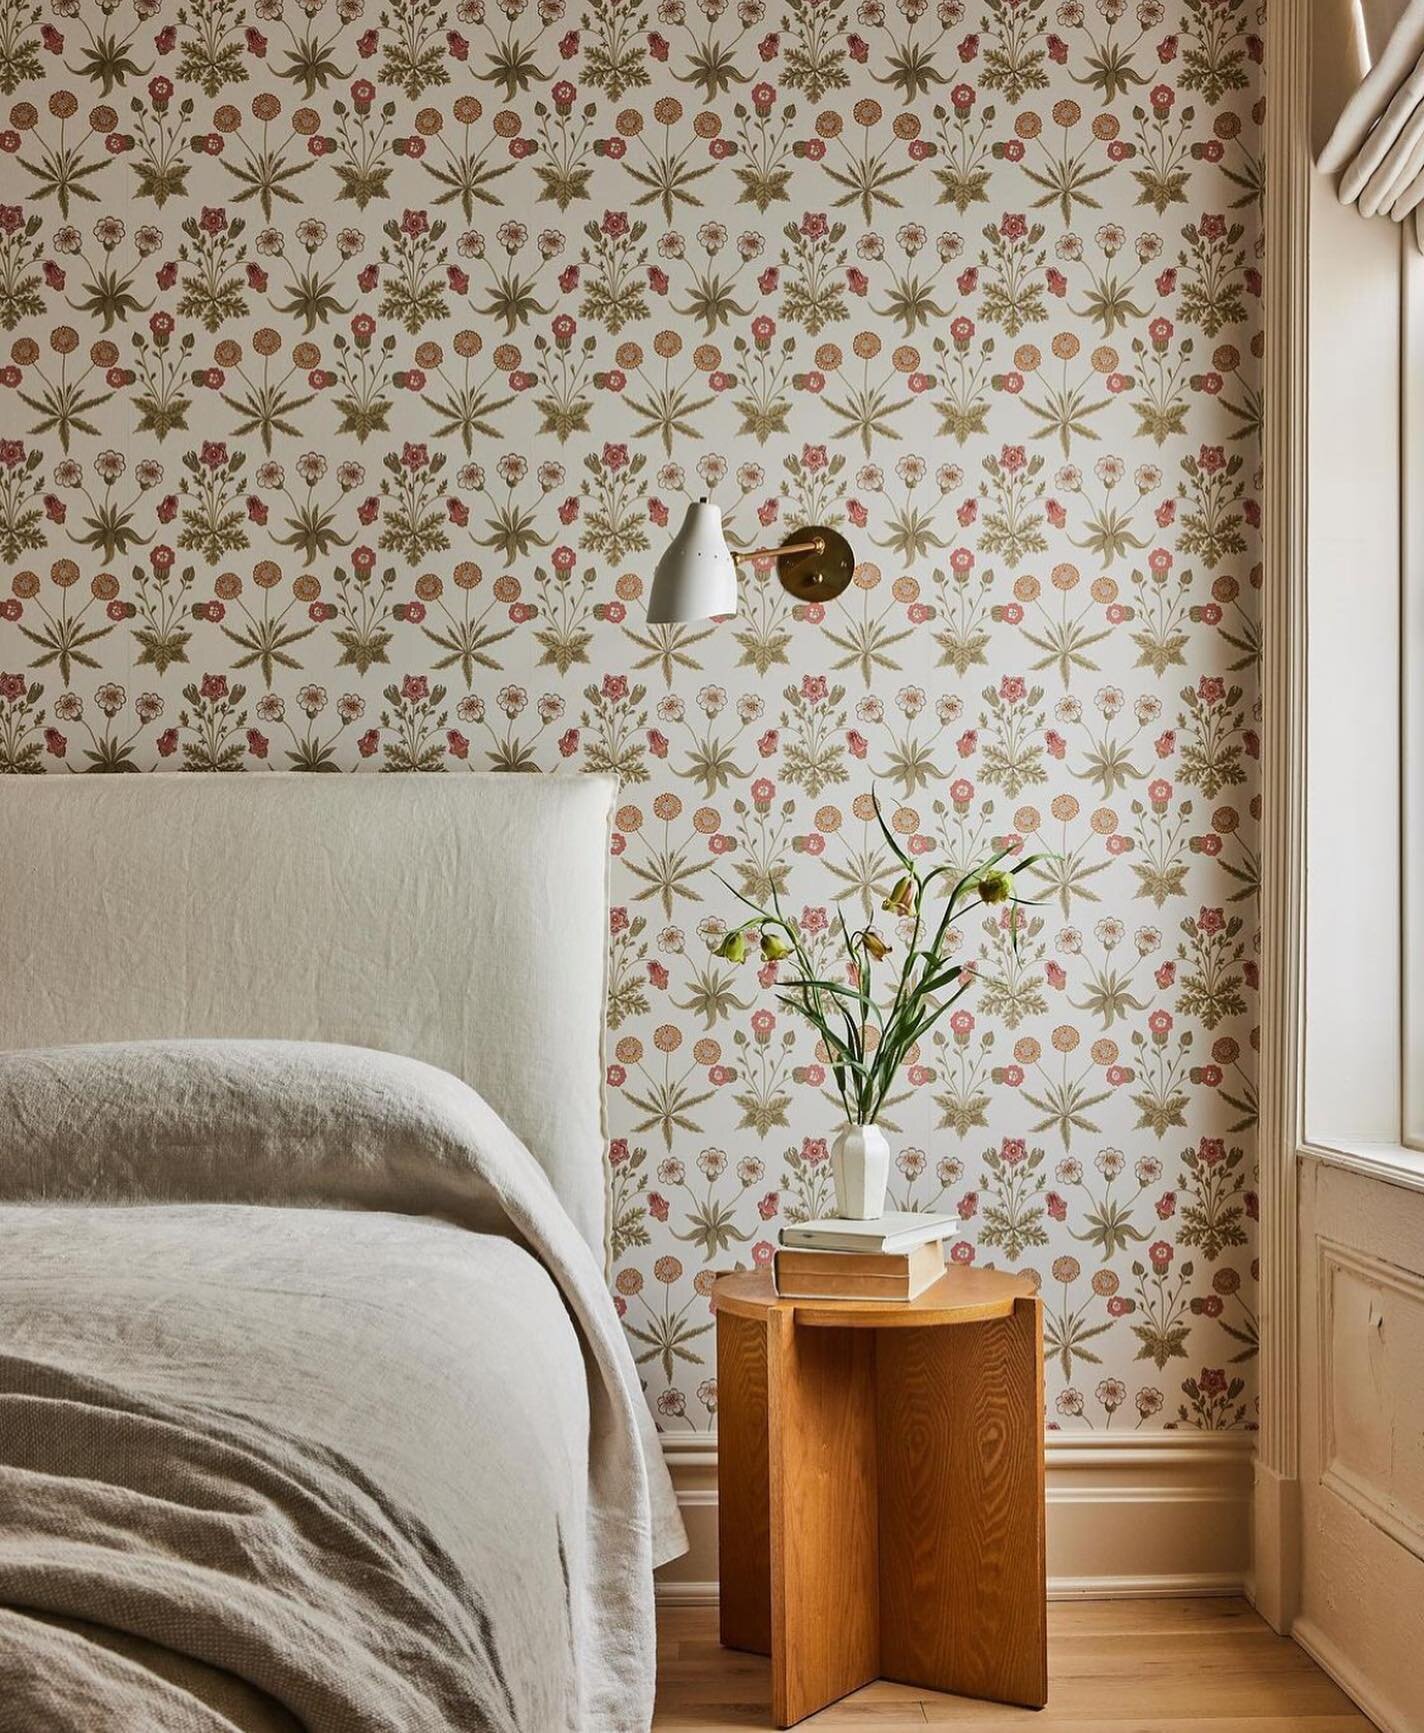 Loving this gorgeous bedroom from @and.studio.interiors . Sorry I&rsquo;ve been MIA, I&rsquo;ve been so busy studying and curating. Anyways, I&rsquo;m a huge fan of the wallpaper and bud vase! I am a firm believer that every room should have fresh fl